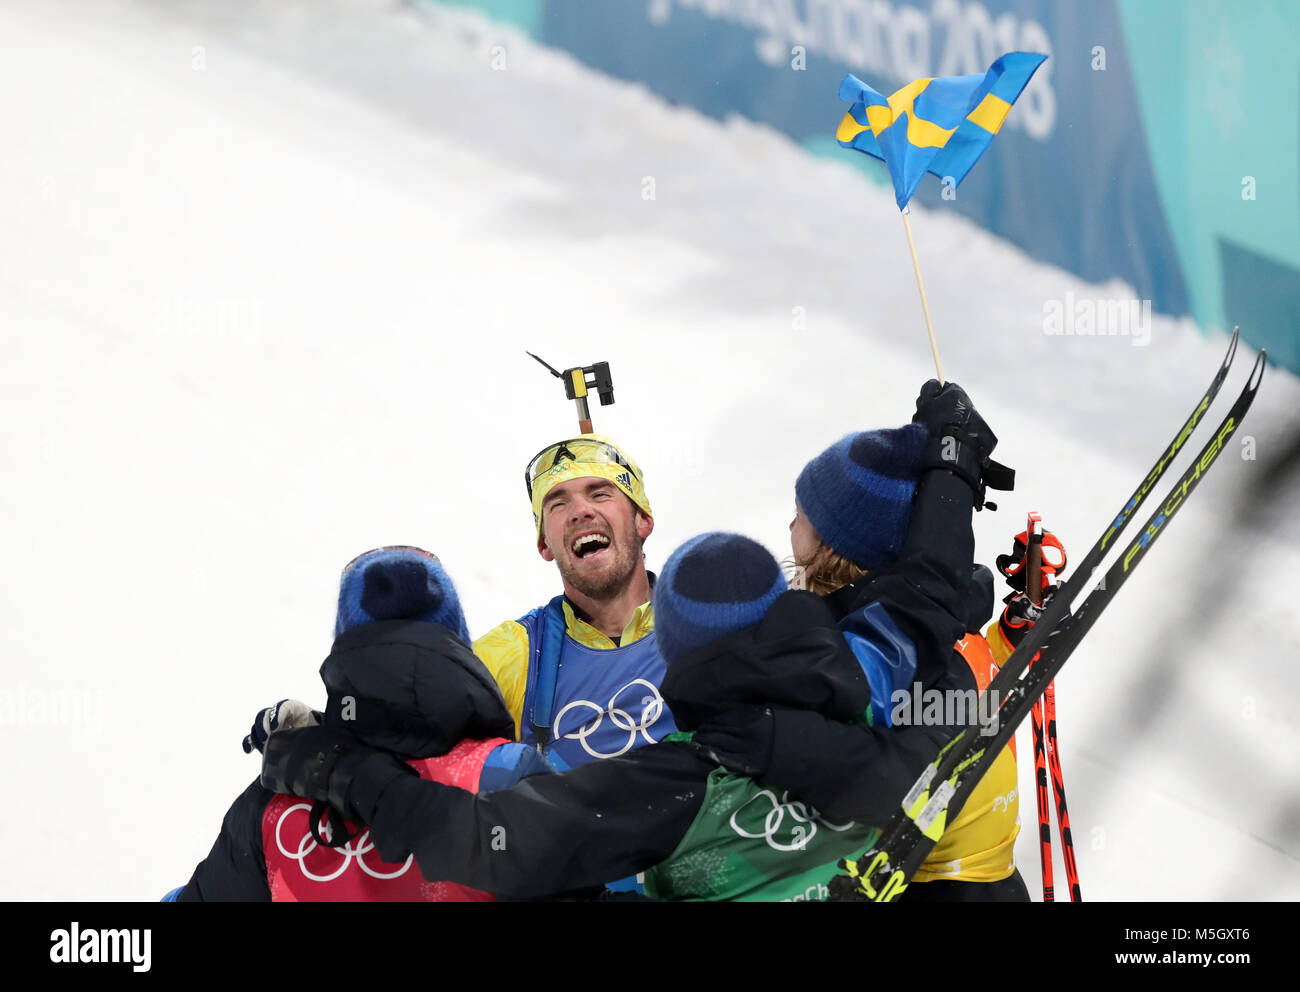 Pyeongchang, South Korea. 23rd Feb, 2018. Fredrik Lindstroem (2nd L) of Sweden celebrates victory with team mates after crossing finishing line of men's 4x7.5km relay of biathlon at the 2018 PyeongChang Winter Olympic Games at Alpensia Biathlon Centre, PyeongChang, South Korea, Feb. 23, 2018. Team Sweden claimed champion in a time of 1:15:16.5. Credit: Li Gang/Xinhua/Alamy Live News Stock Photo